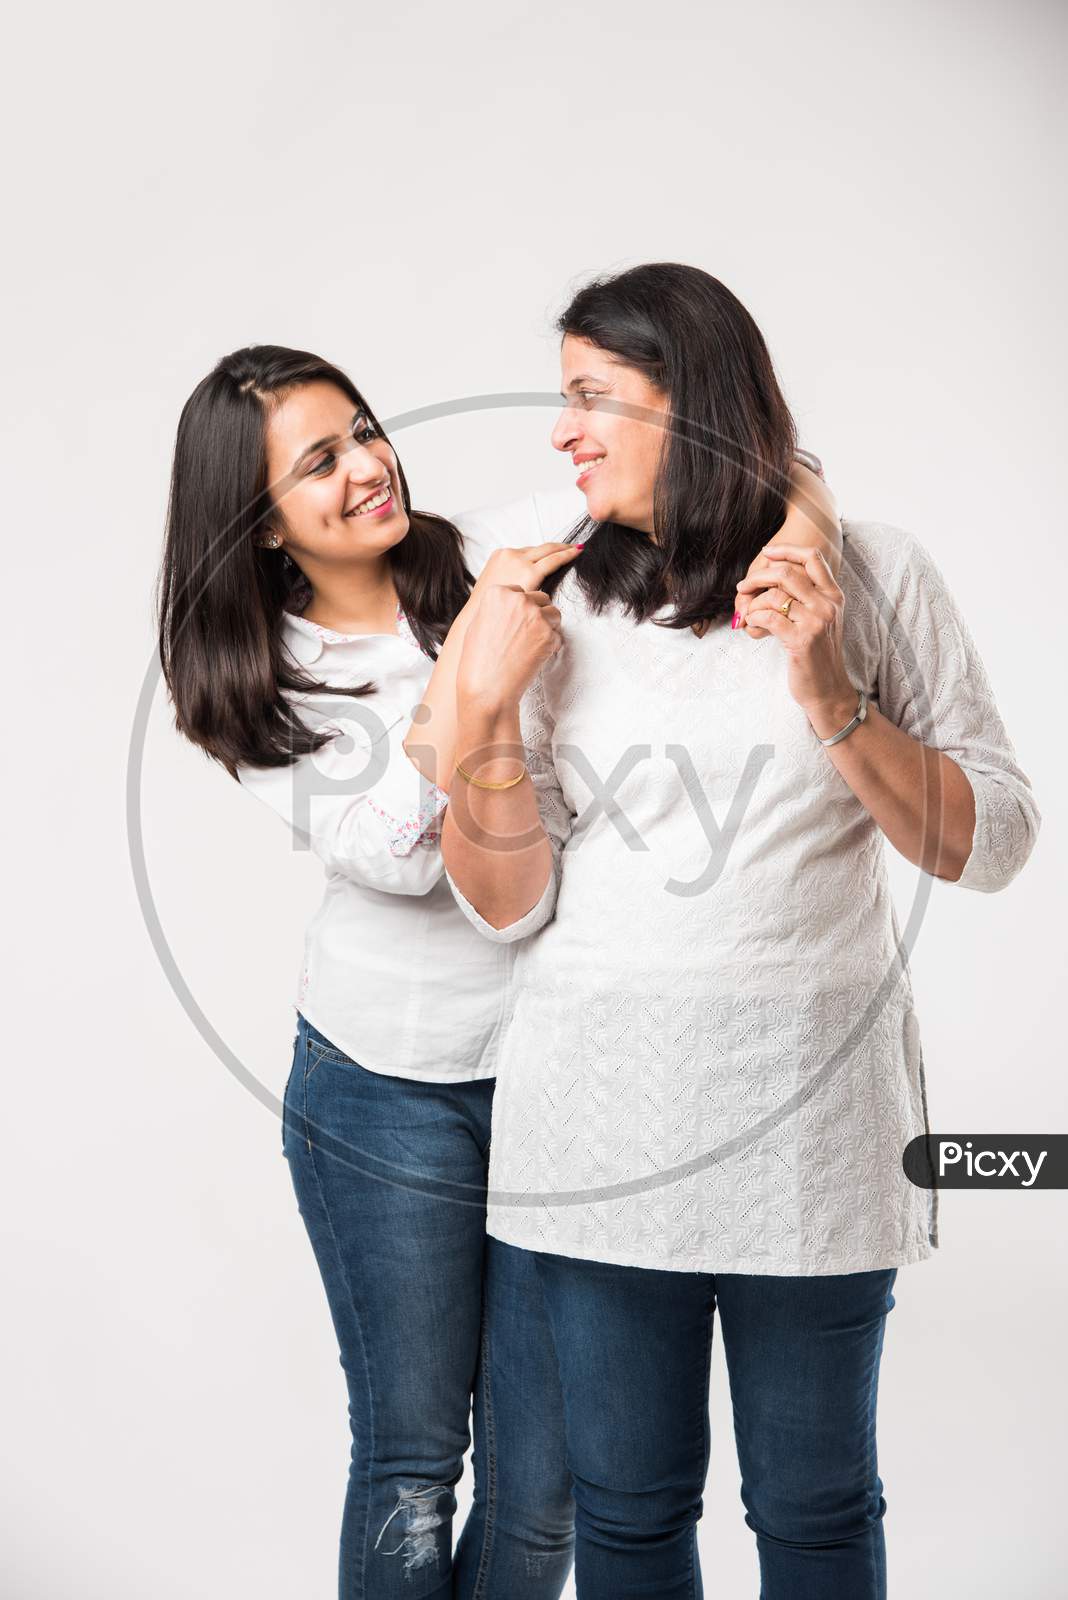 Old mother with young daughter, standing isolated over white background